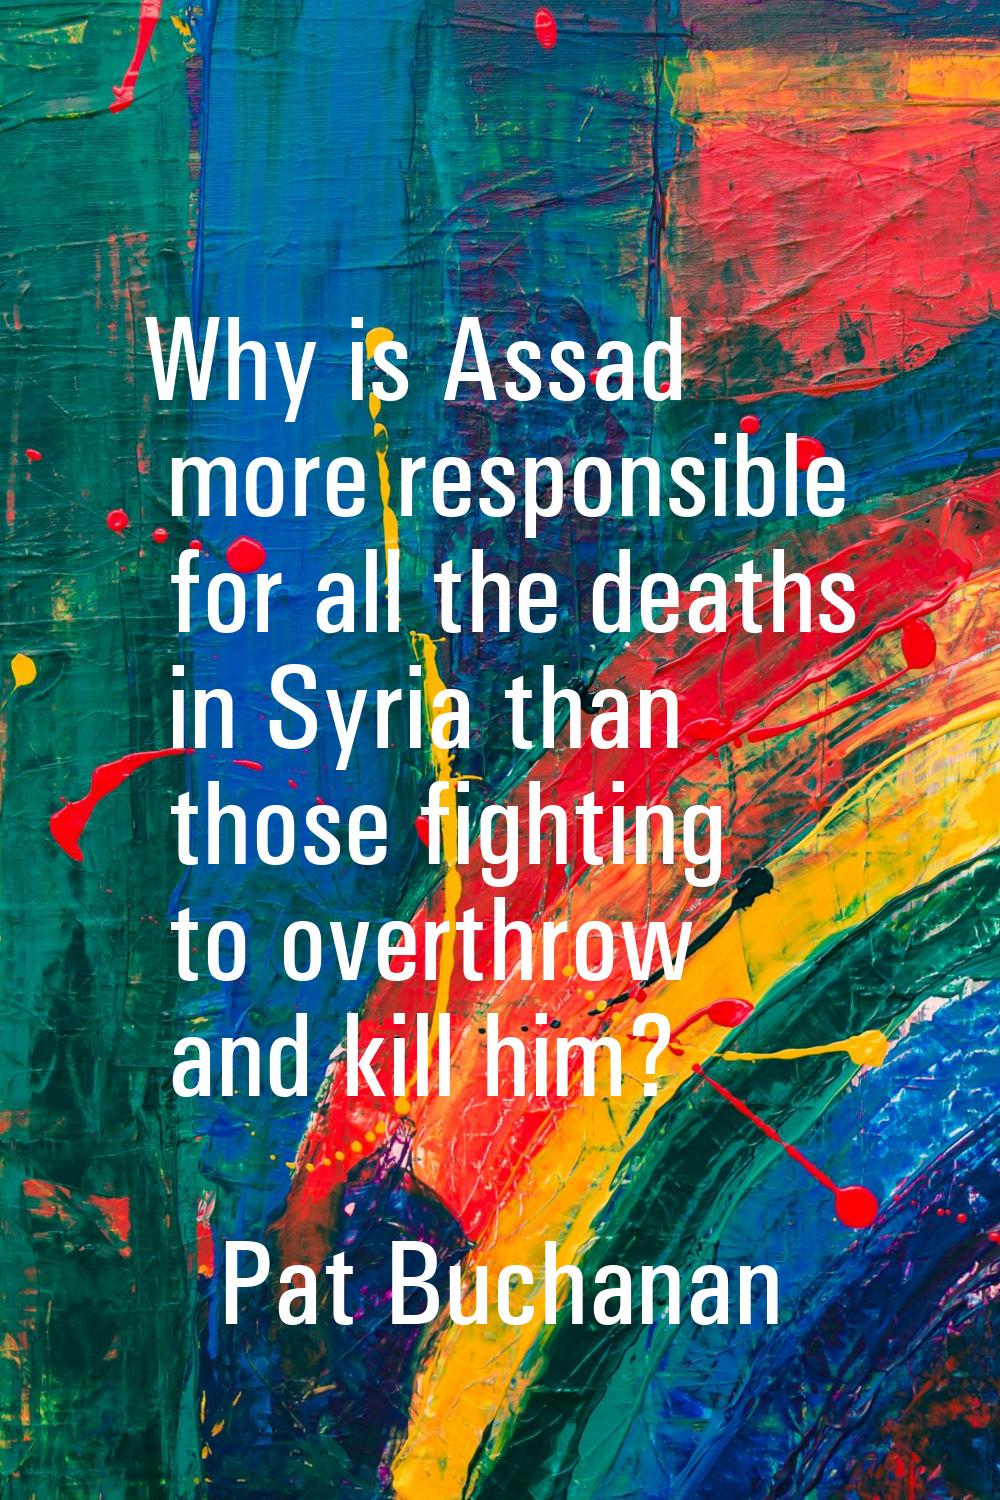 Why is Assad more responsible for all the deaths in Syria than those fighting to overthrow and kill